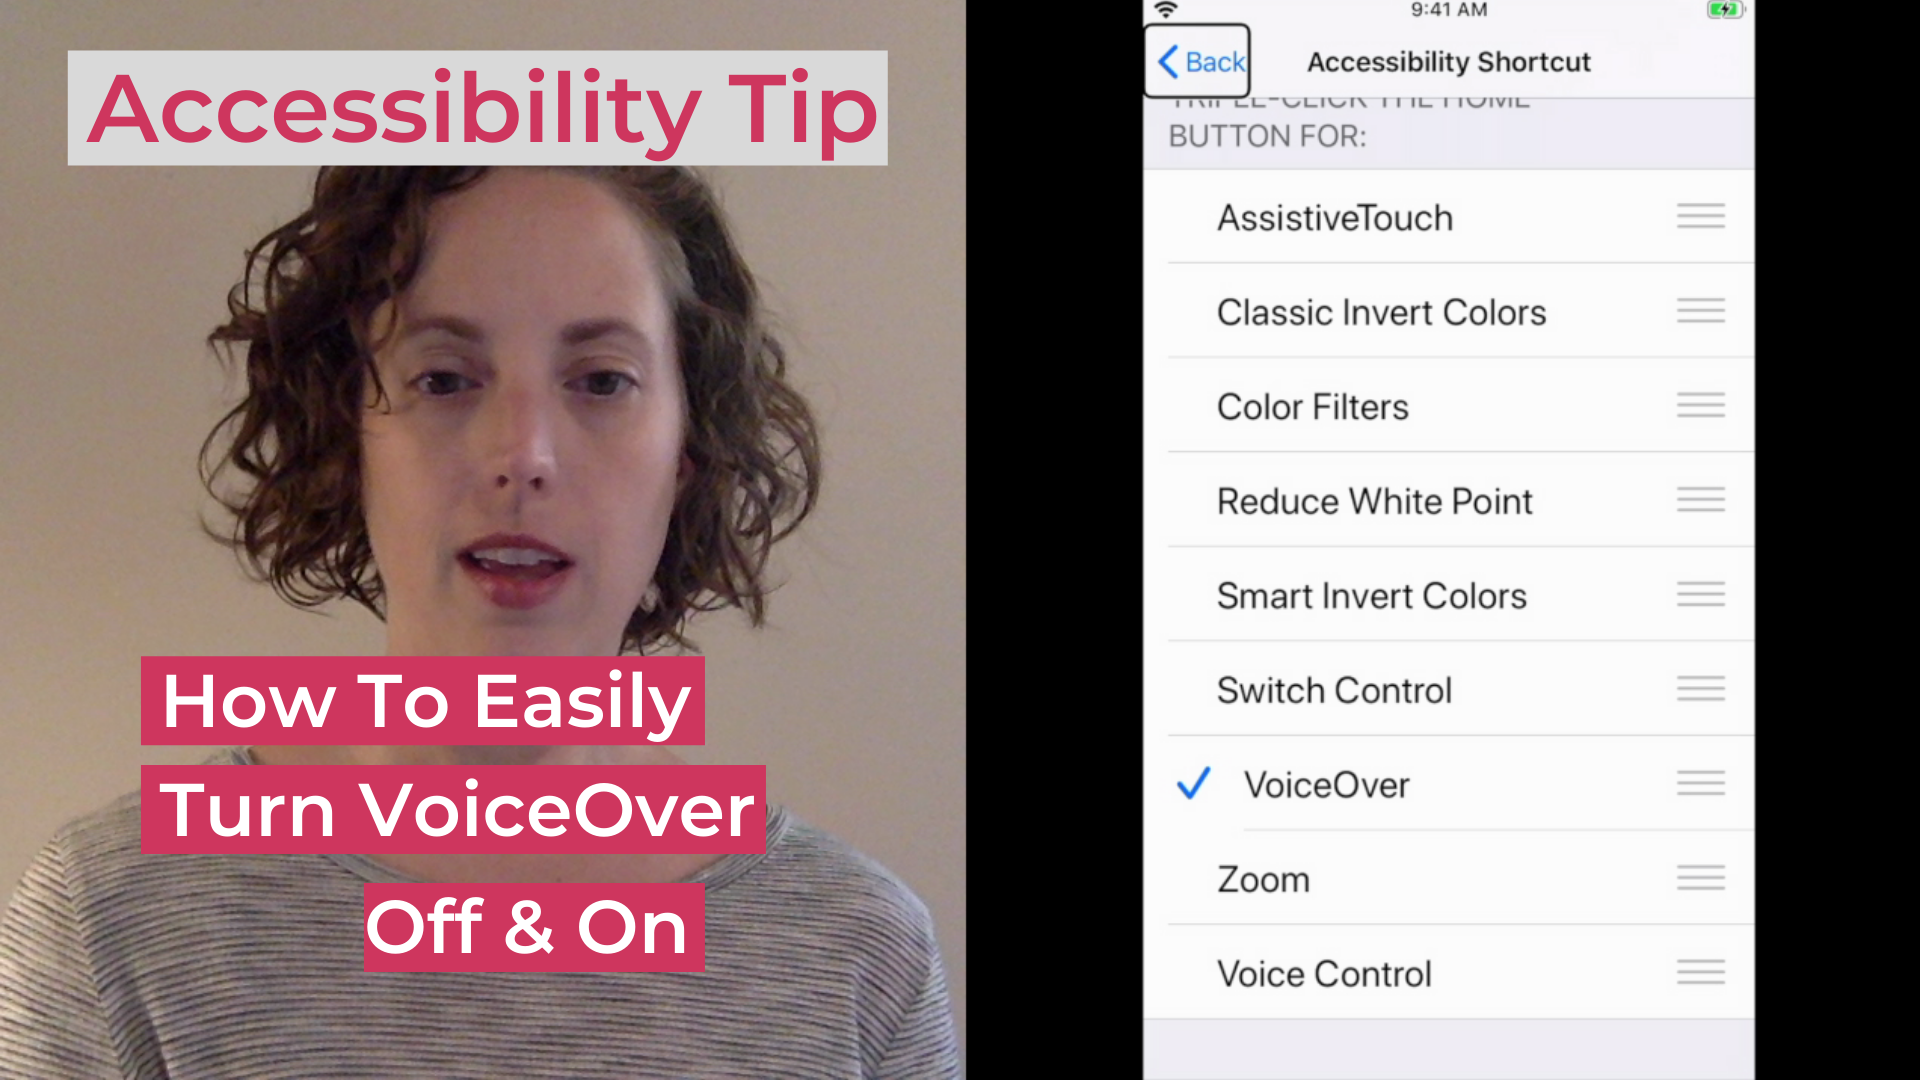 Two column image with Jessica Hipp on the left. Text is overlaid on the top and bottom that reads: Accessibility Tip: How to easily Turn VoiceOver Off & On. The right column is a screenshot of accessibility shortcut on iOS